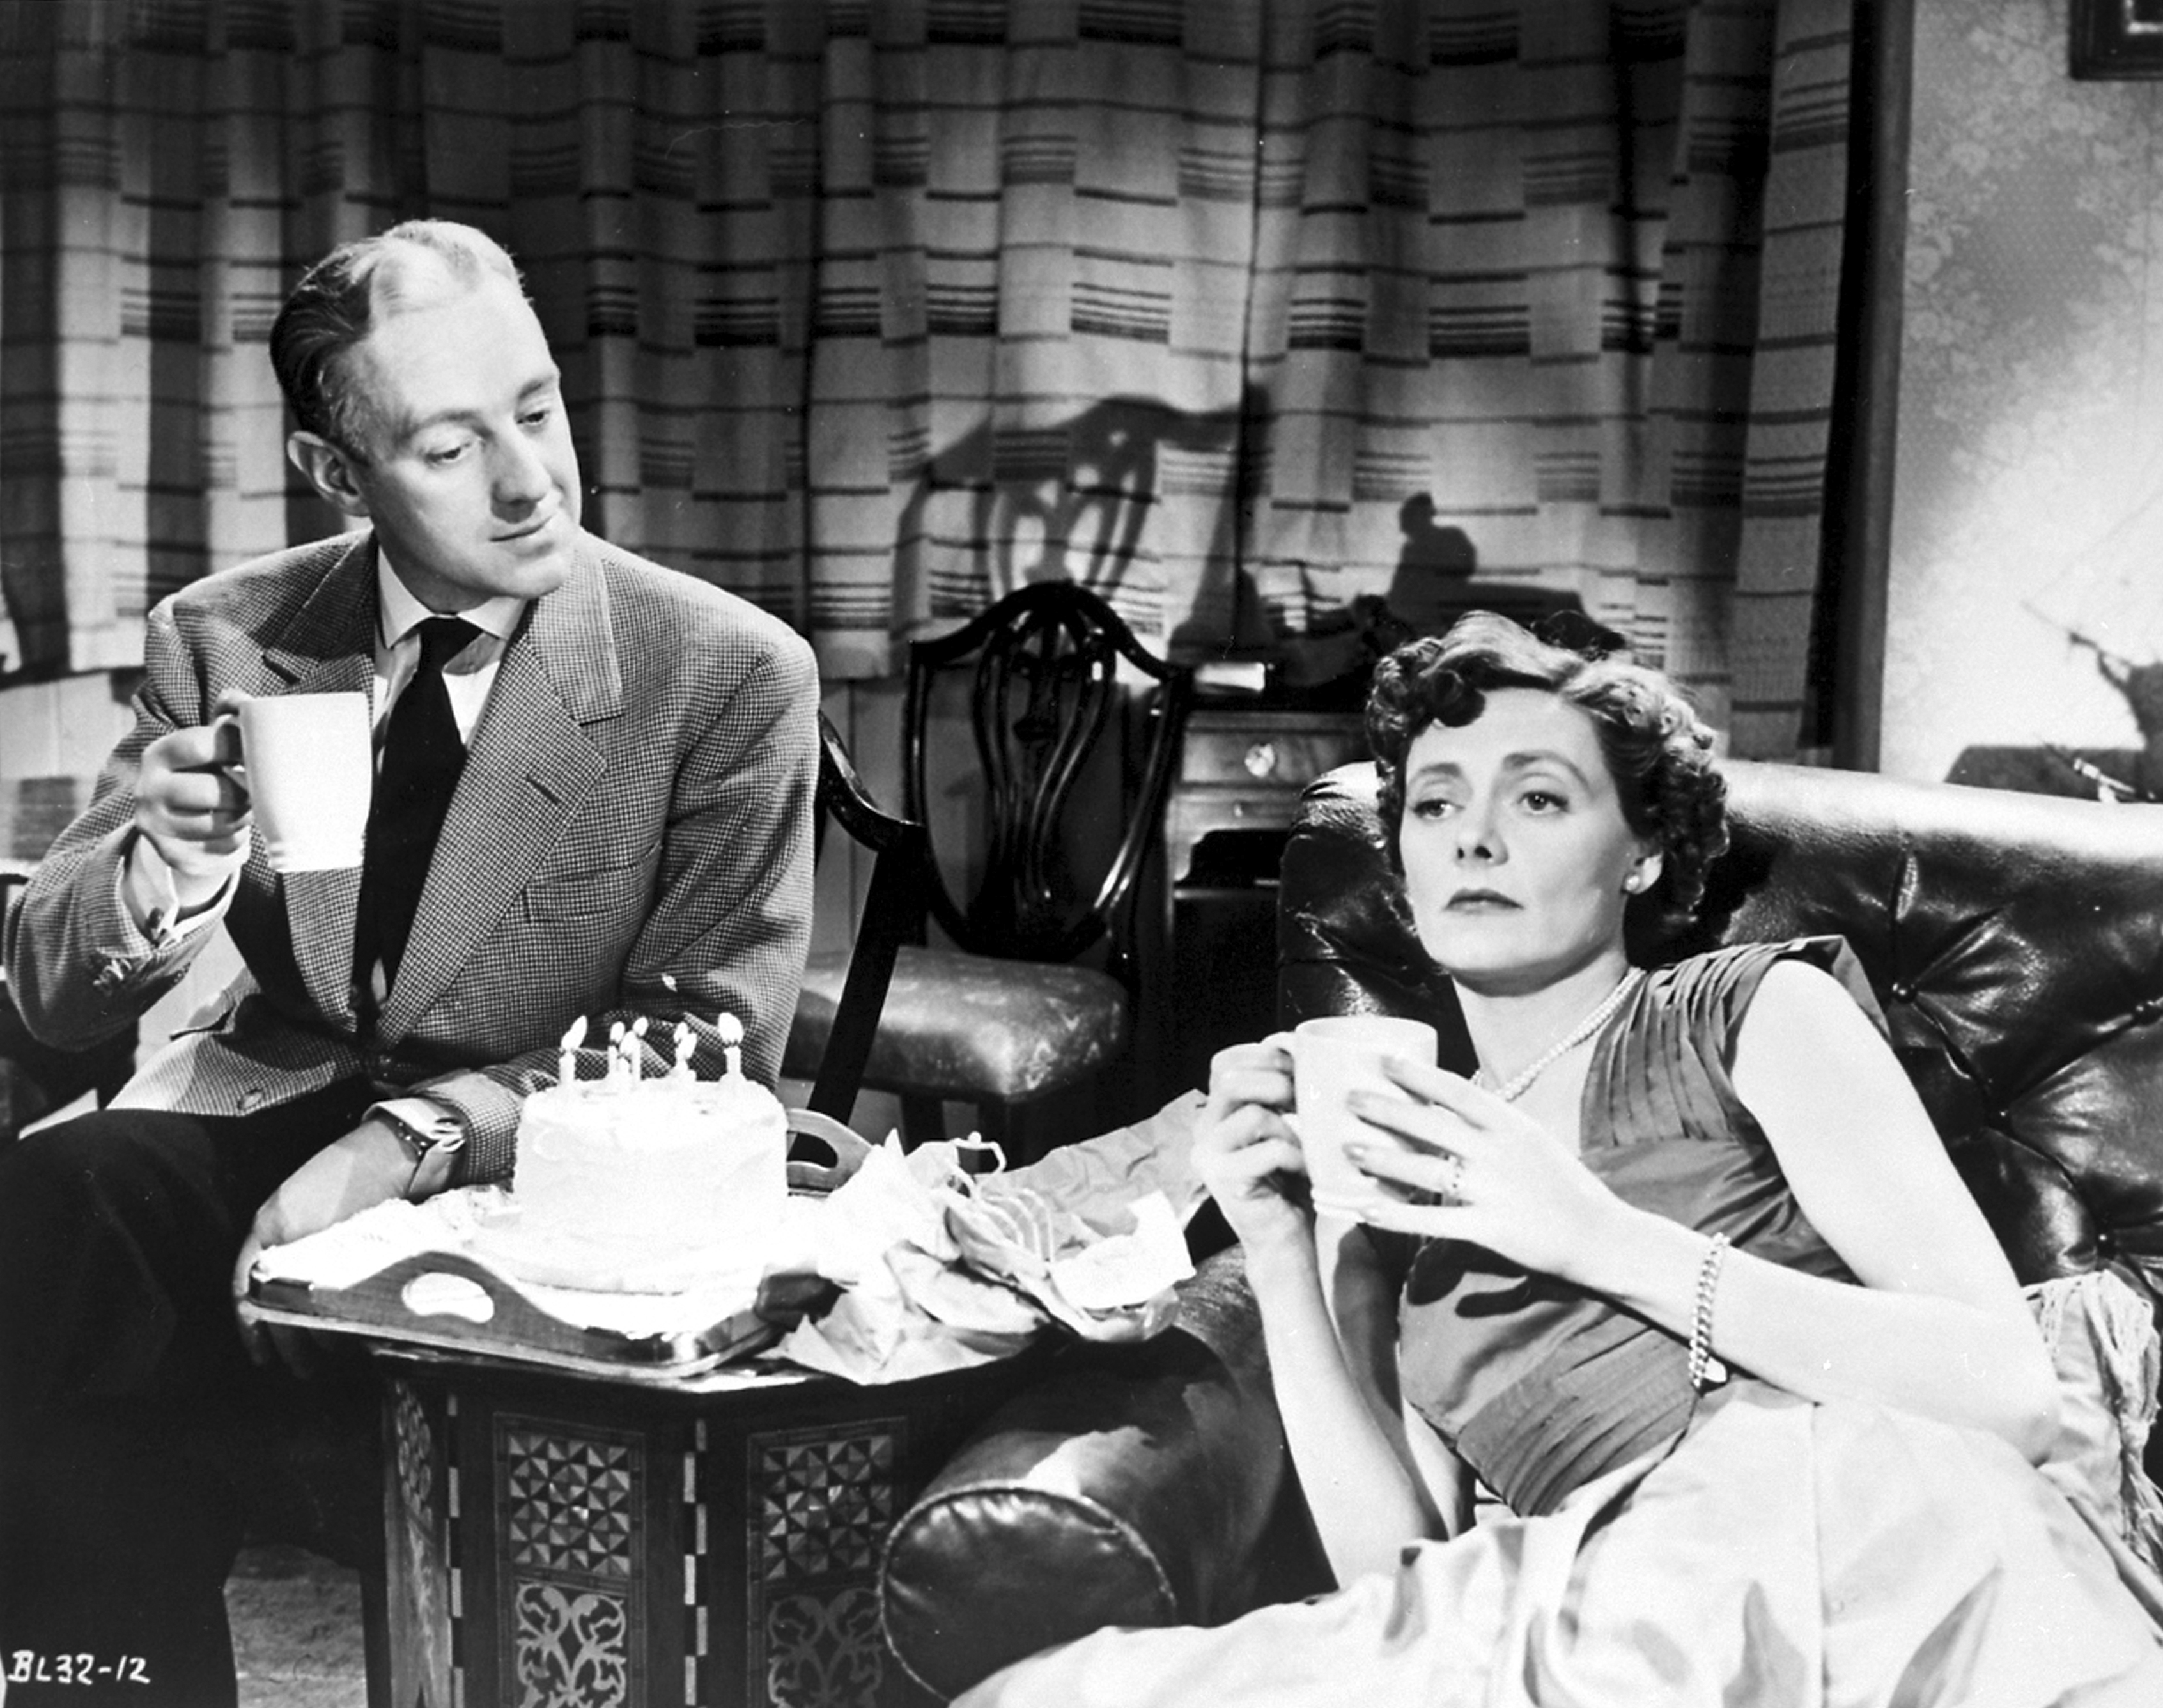 Still of Alec Guinness and Celia Johnson in The Captain's Paradise (1953)